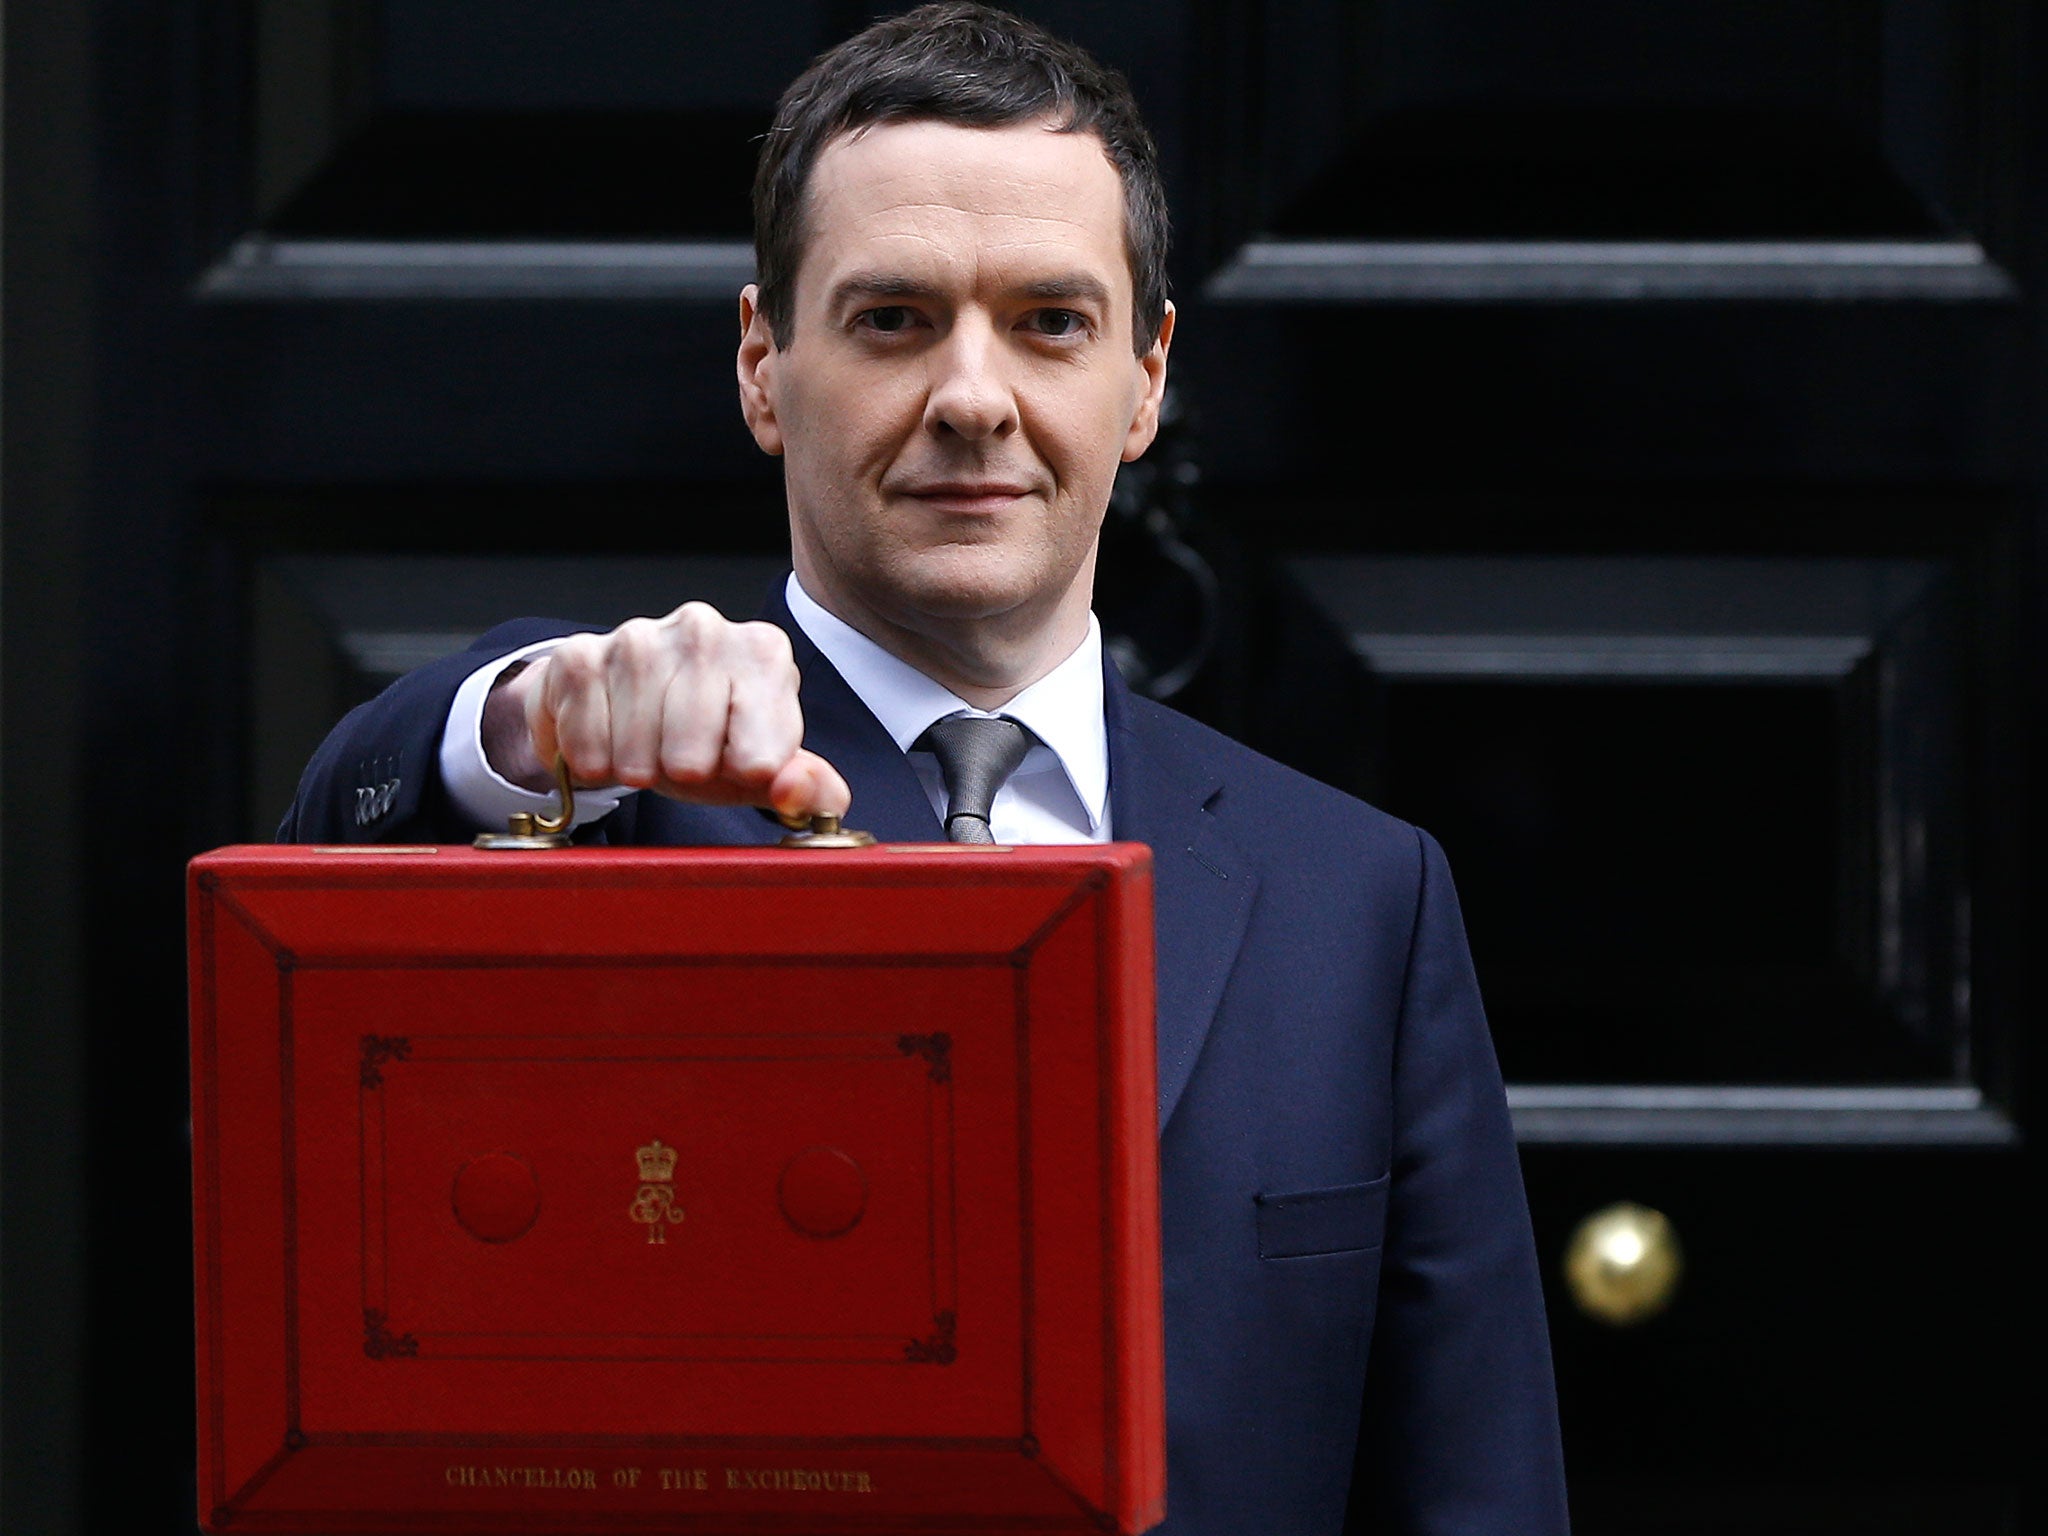 Britain's Chancellor George Osborne stands with the traditional red dispatch box outside his official residence at 11 Downing Street in London, prior to unveiling the budget